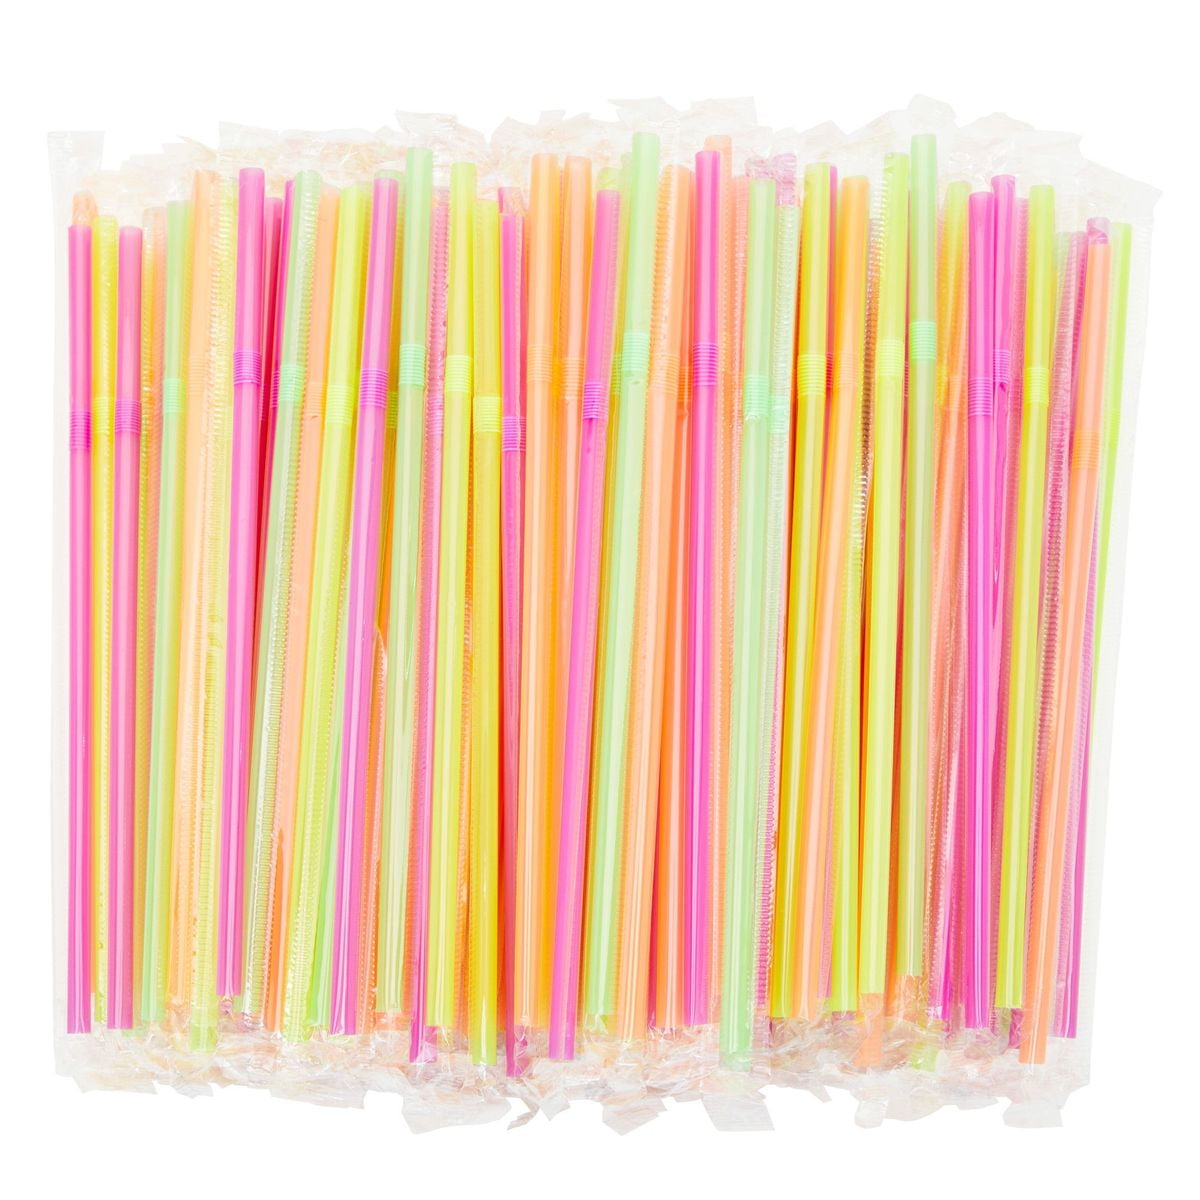 X-Long Reusable Silicone Straws - Pink/Yellow/Gray/Red (4pk